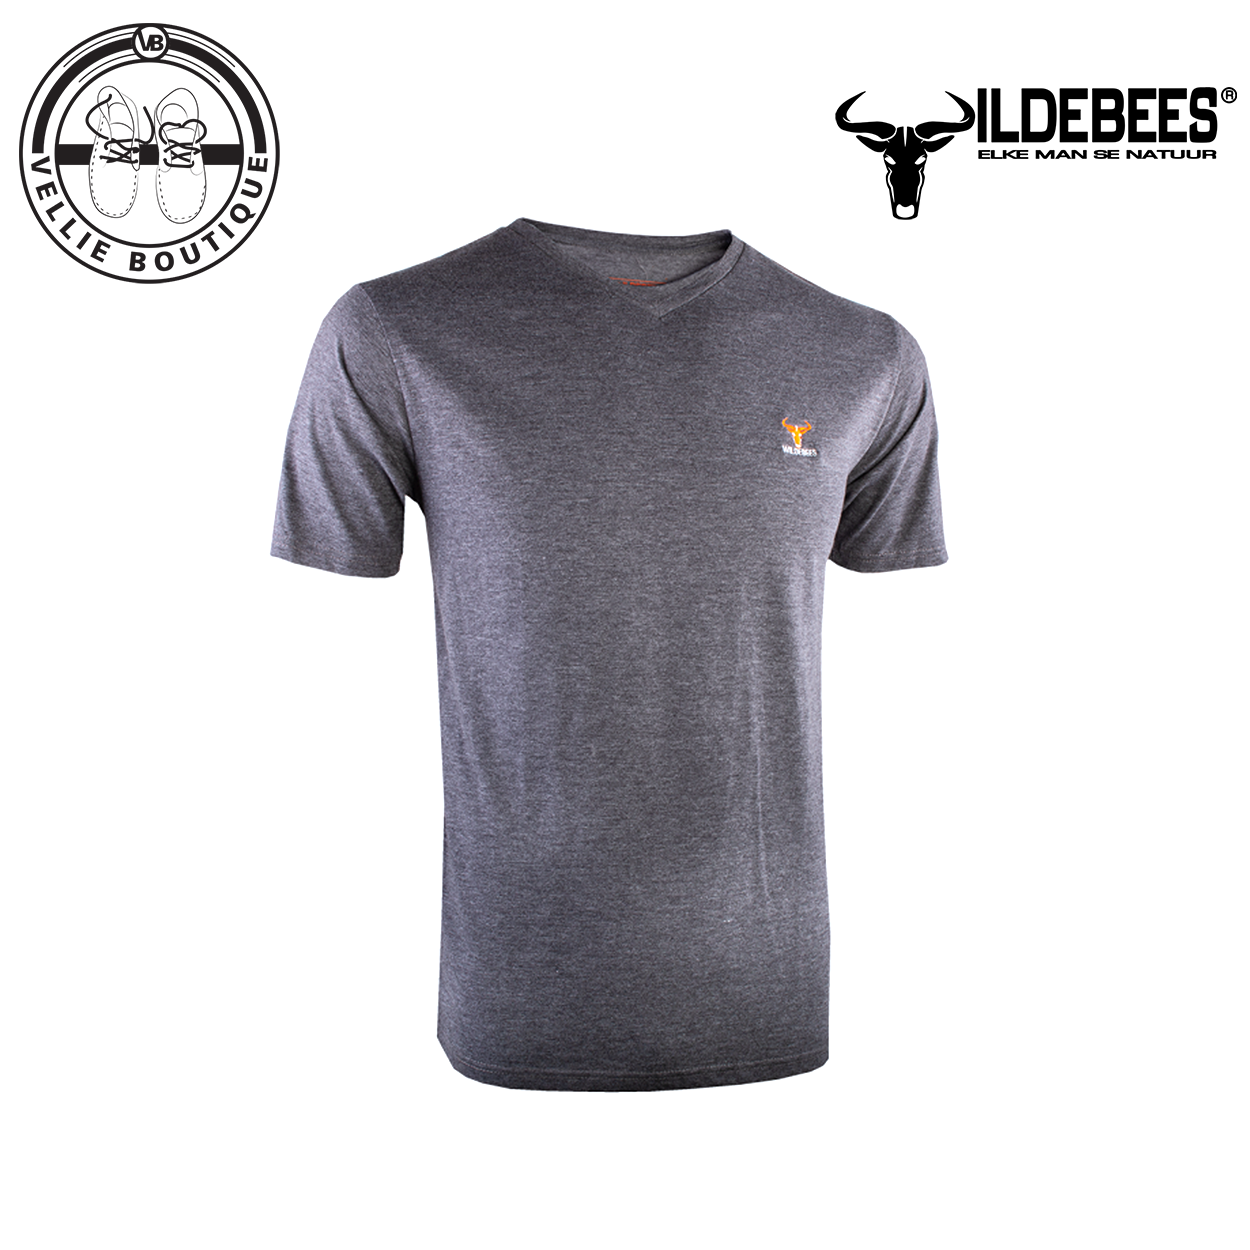 Wildebees Mens Fashion V-Neck Tee Charcoal